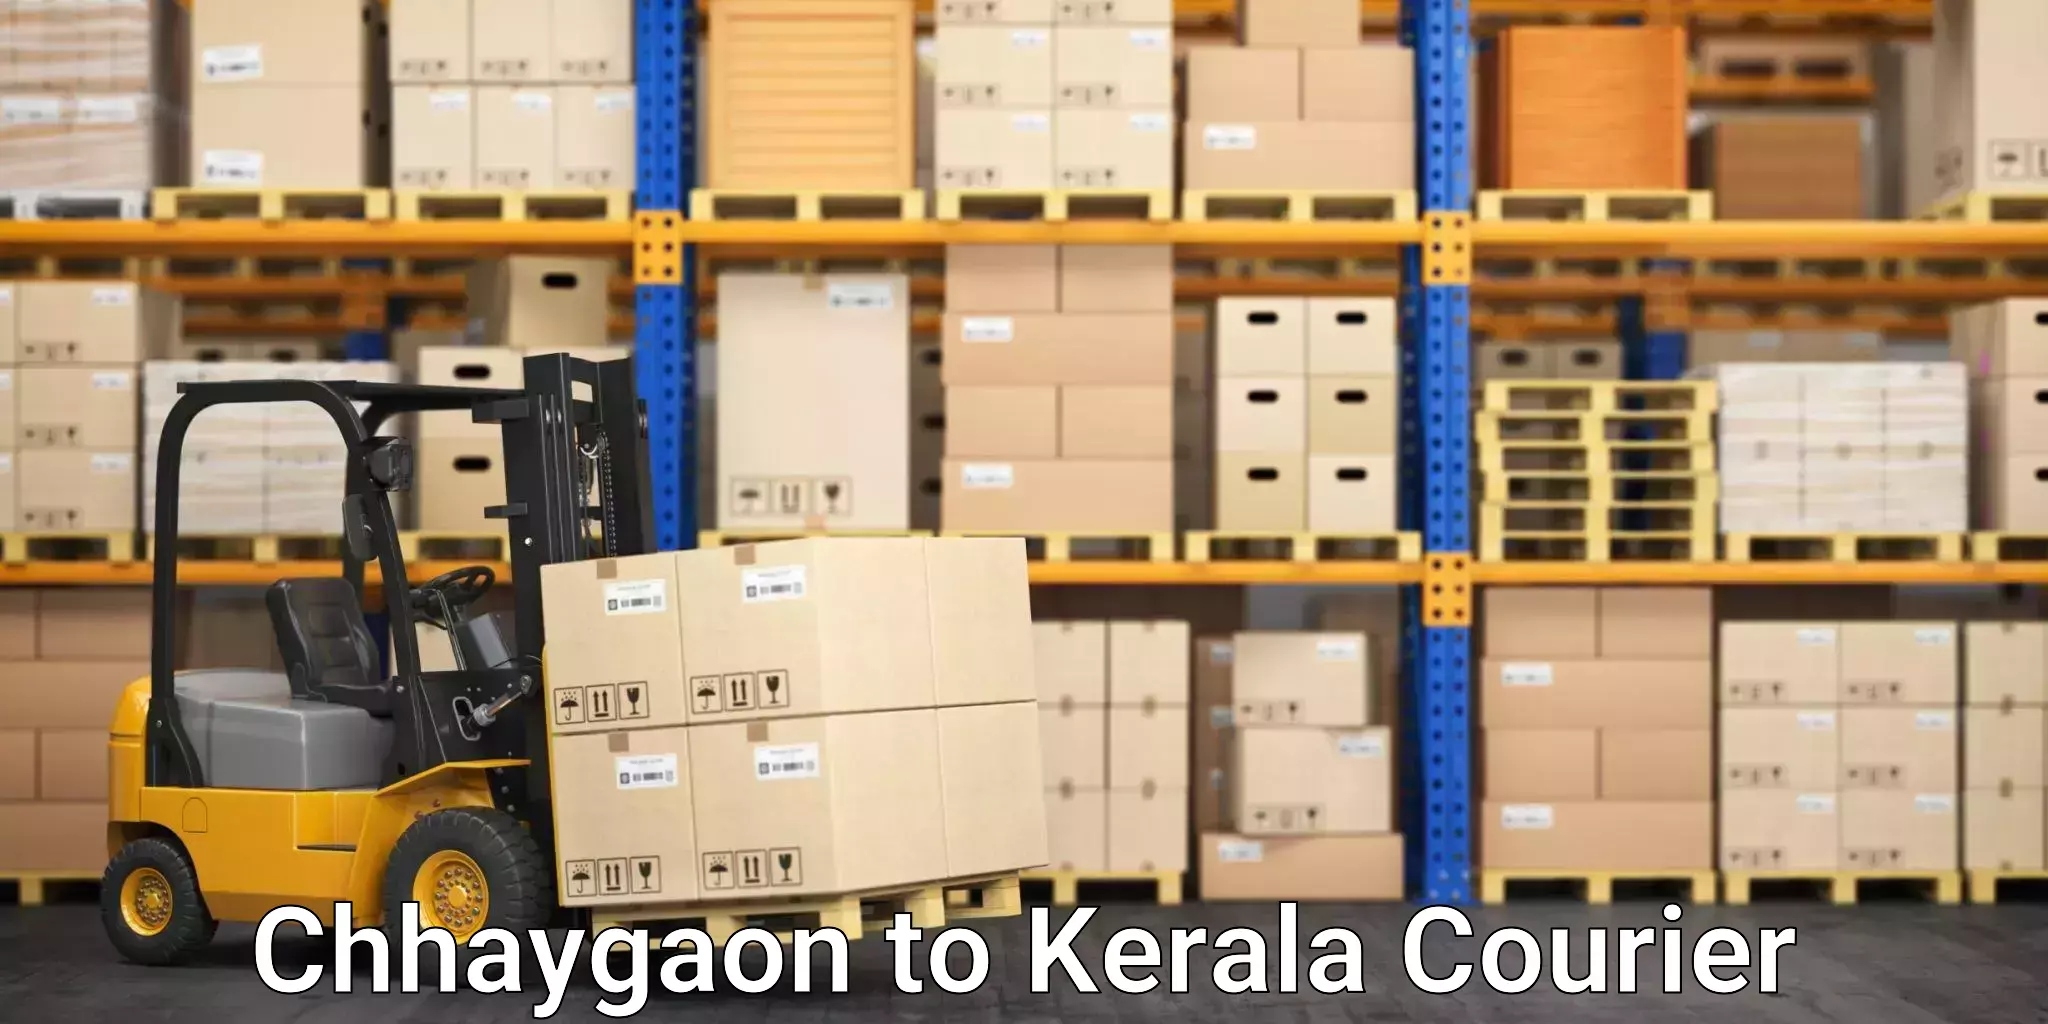 Courier service comparison Chhaygaon to Pazhayannur